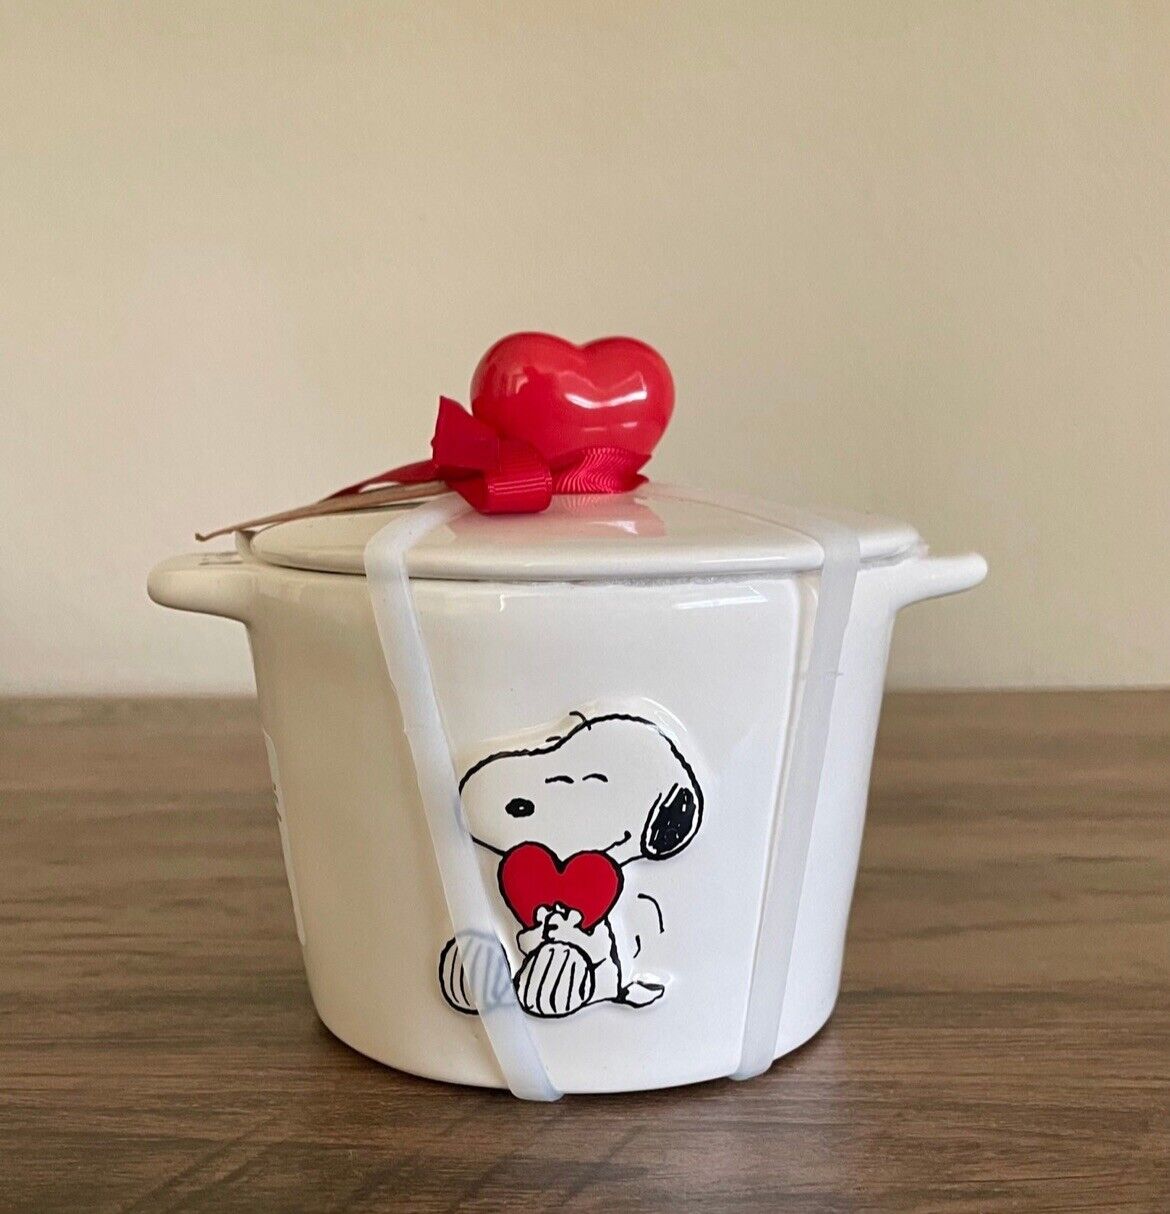 PEANUTS X RAE DUNN BY MAGENTA SNOOPY CANISTER WITH RED HEART